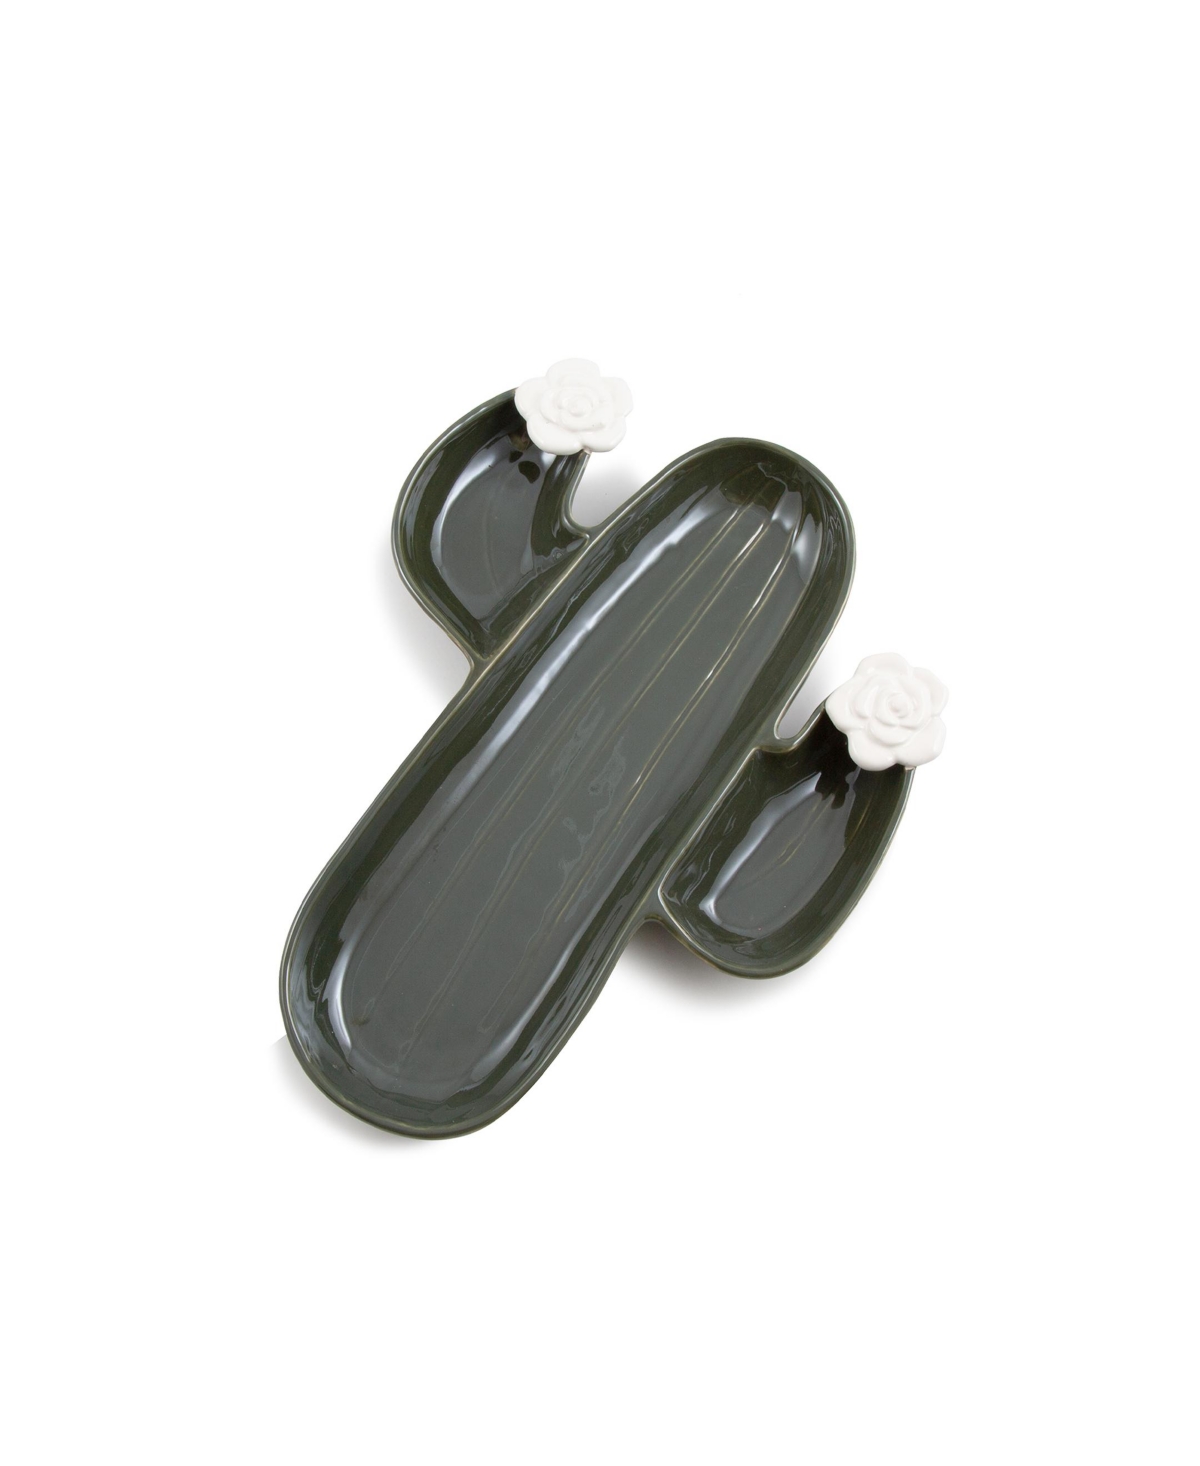 Thirstystone Cactus Tray With Condiment Bowls In Green